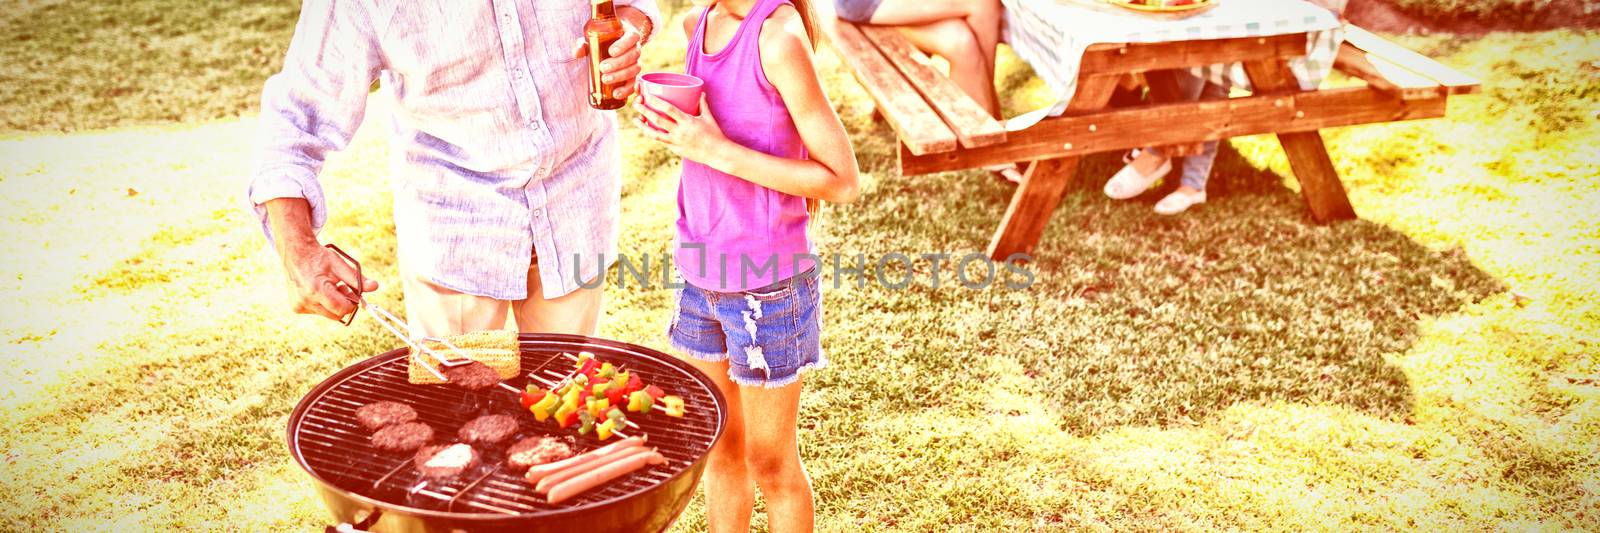 Grandfather and granddaughter preparing barbecue while family having meal by Wavebreakmedia